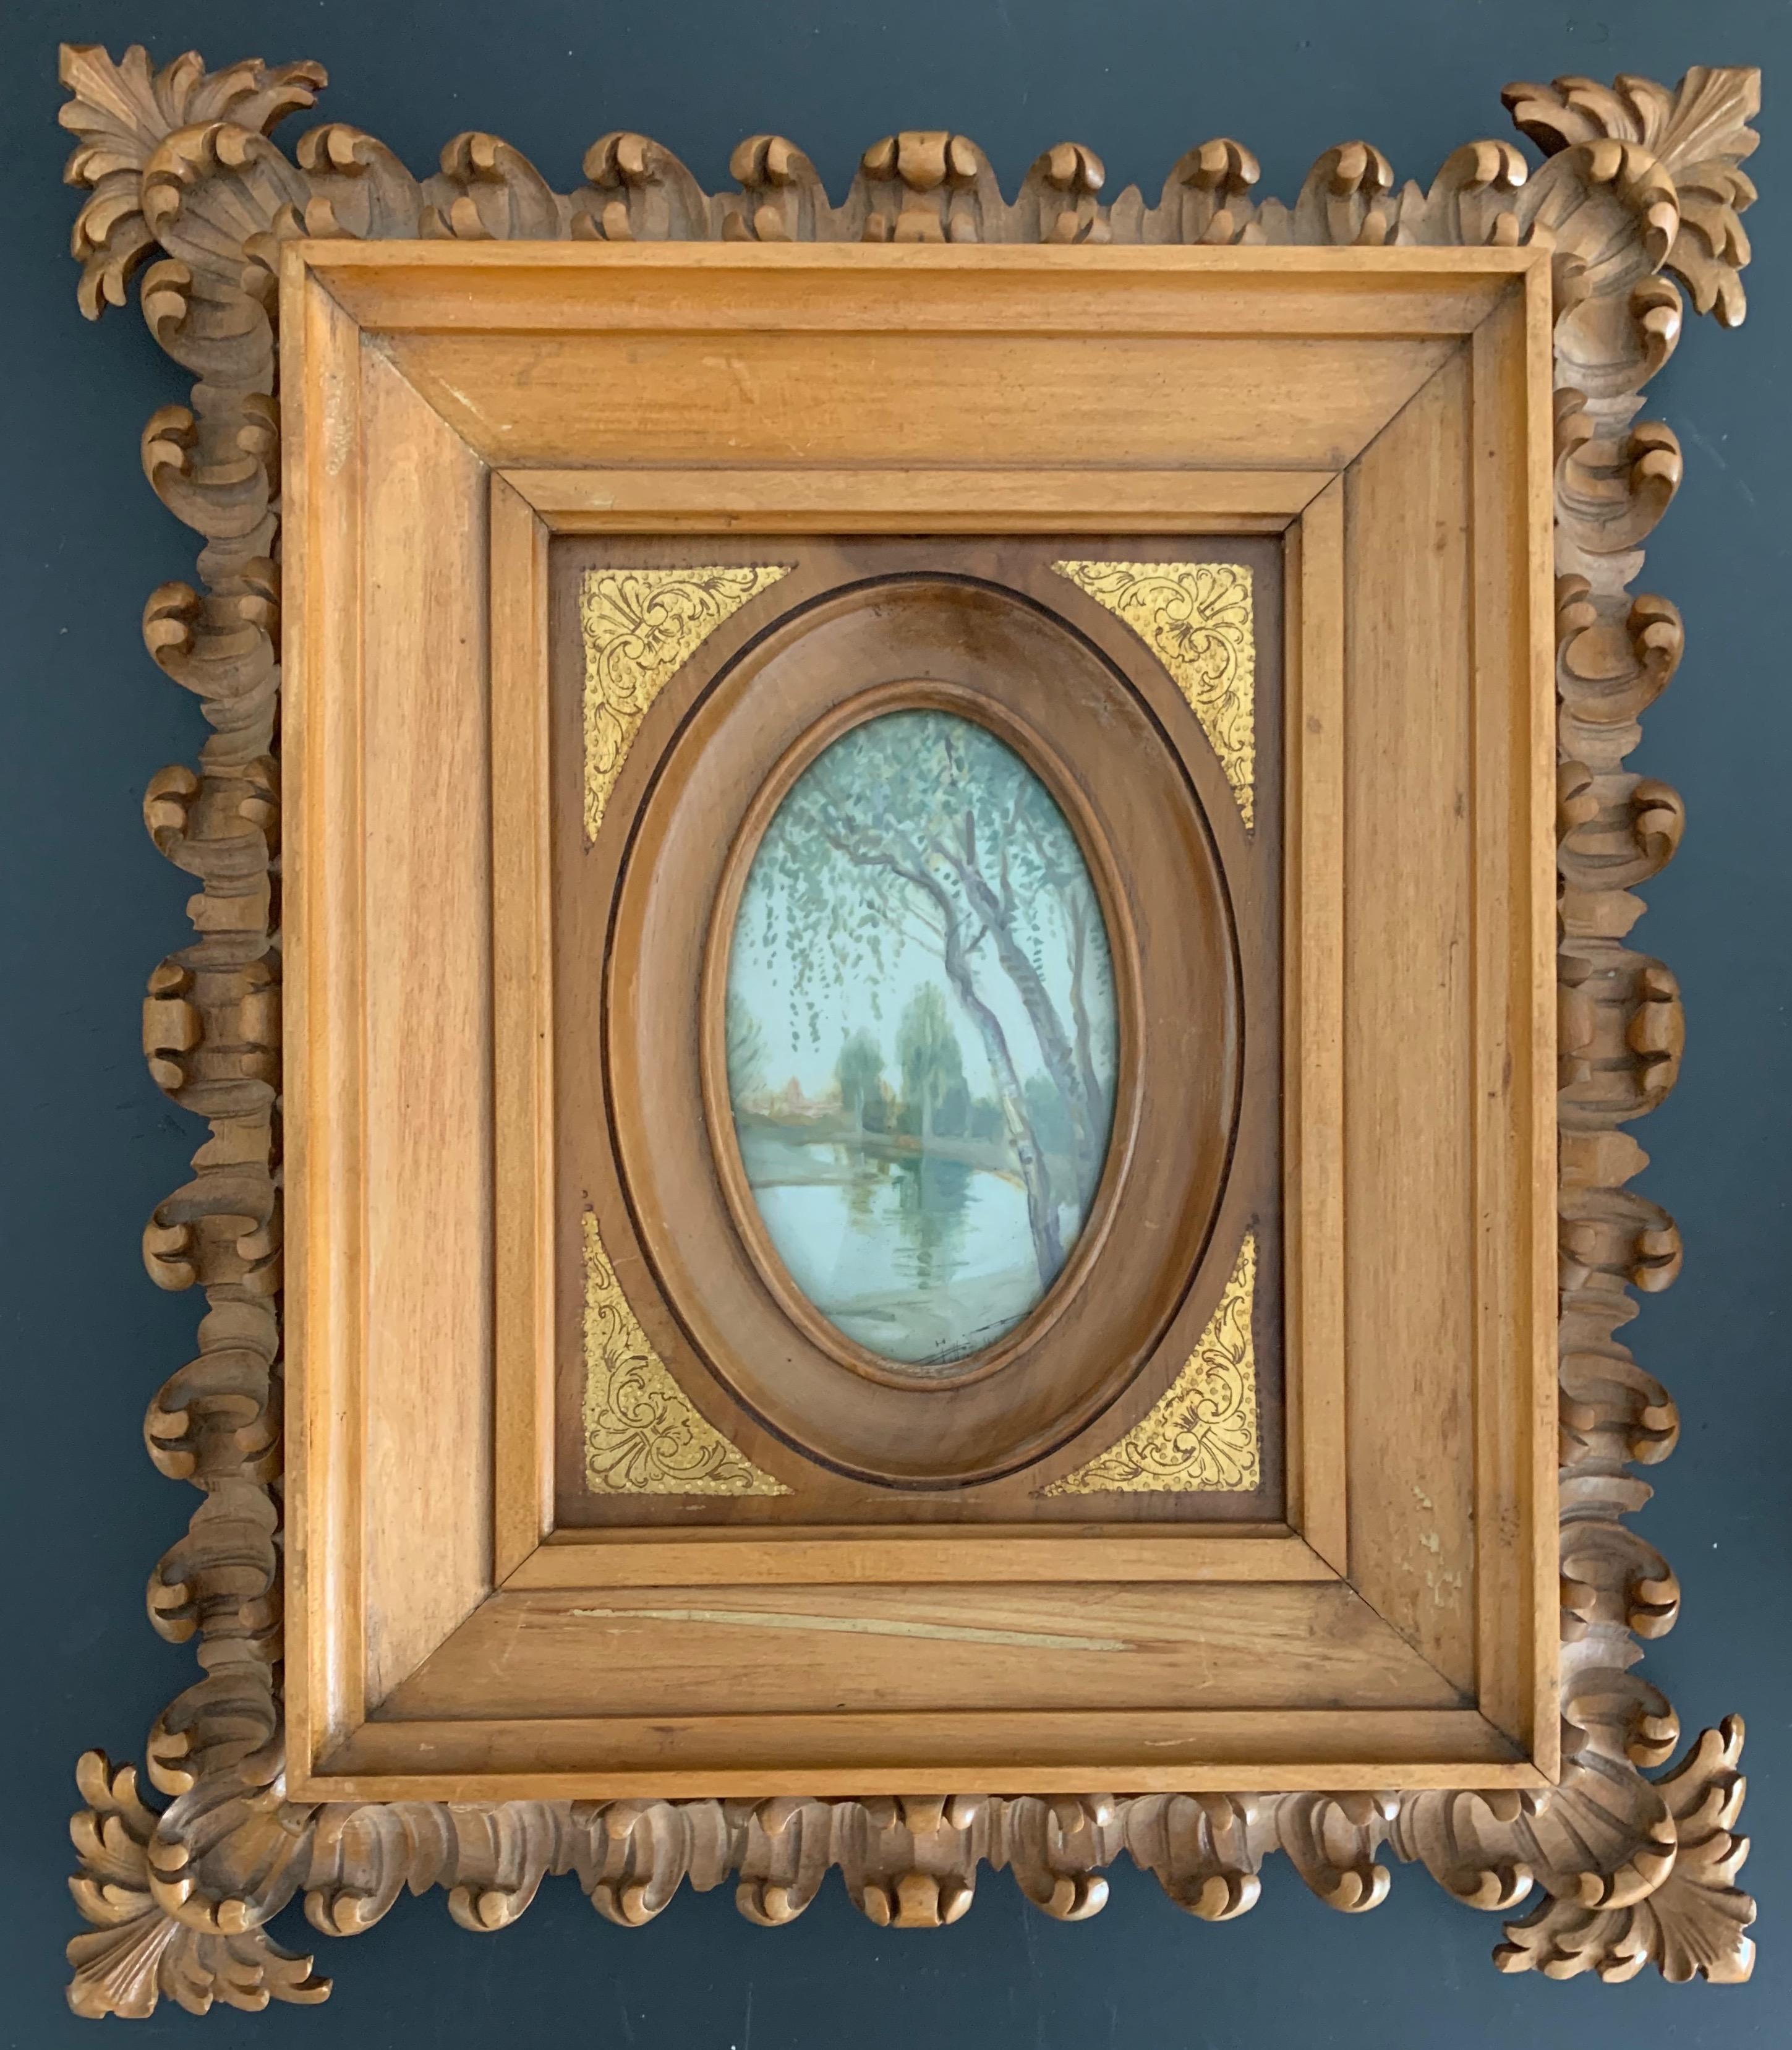 Rare and exceptionally carved picture frame with landscape painting behind convex glass panel.

This unique picture frame is another one of our wonderful recent finds. It truly is a work of art (in more ways than one) and, for us, this rare and